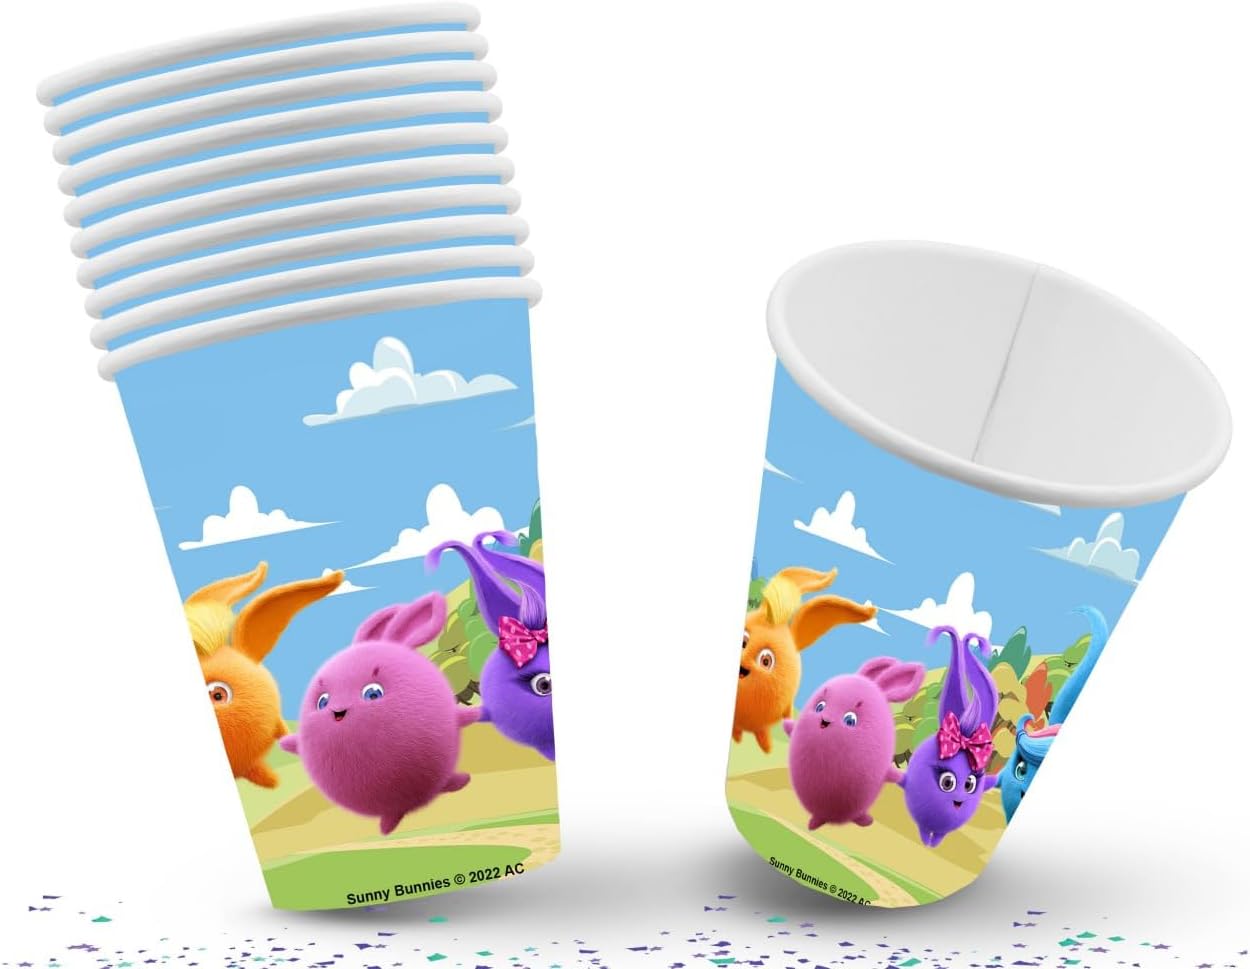 Joyful Sunny Bunnies Party Cups - Set of 10 - Colorful Drinkware for Children's Celebrations